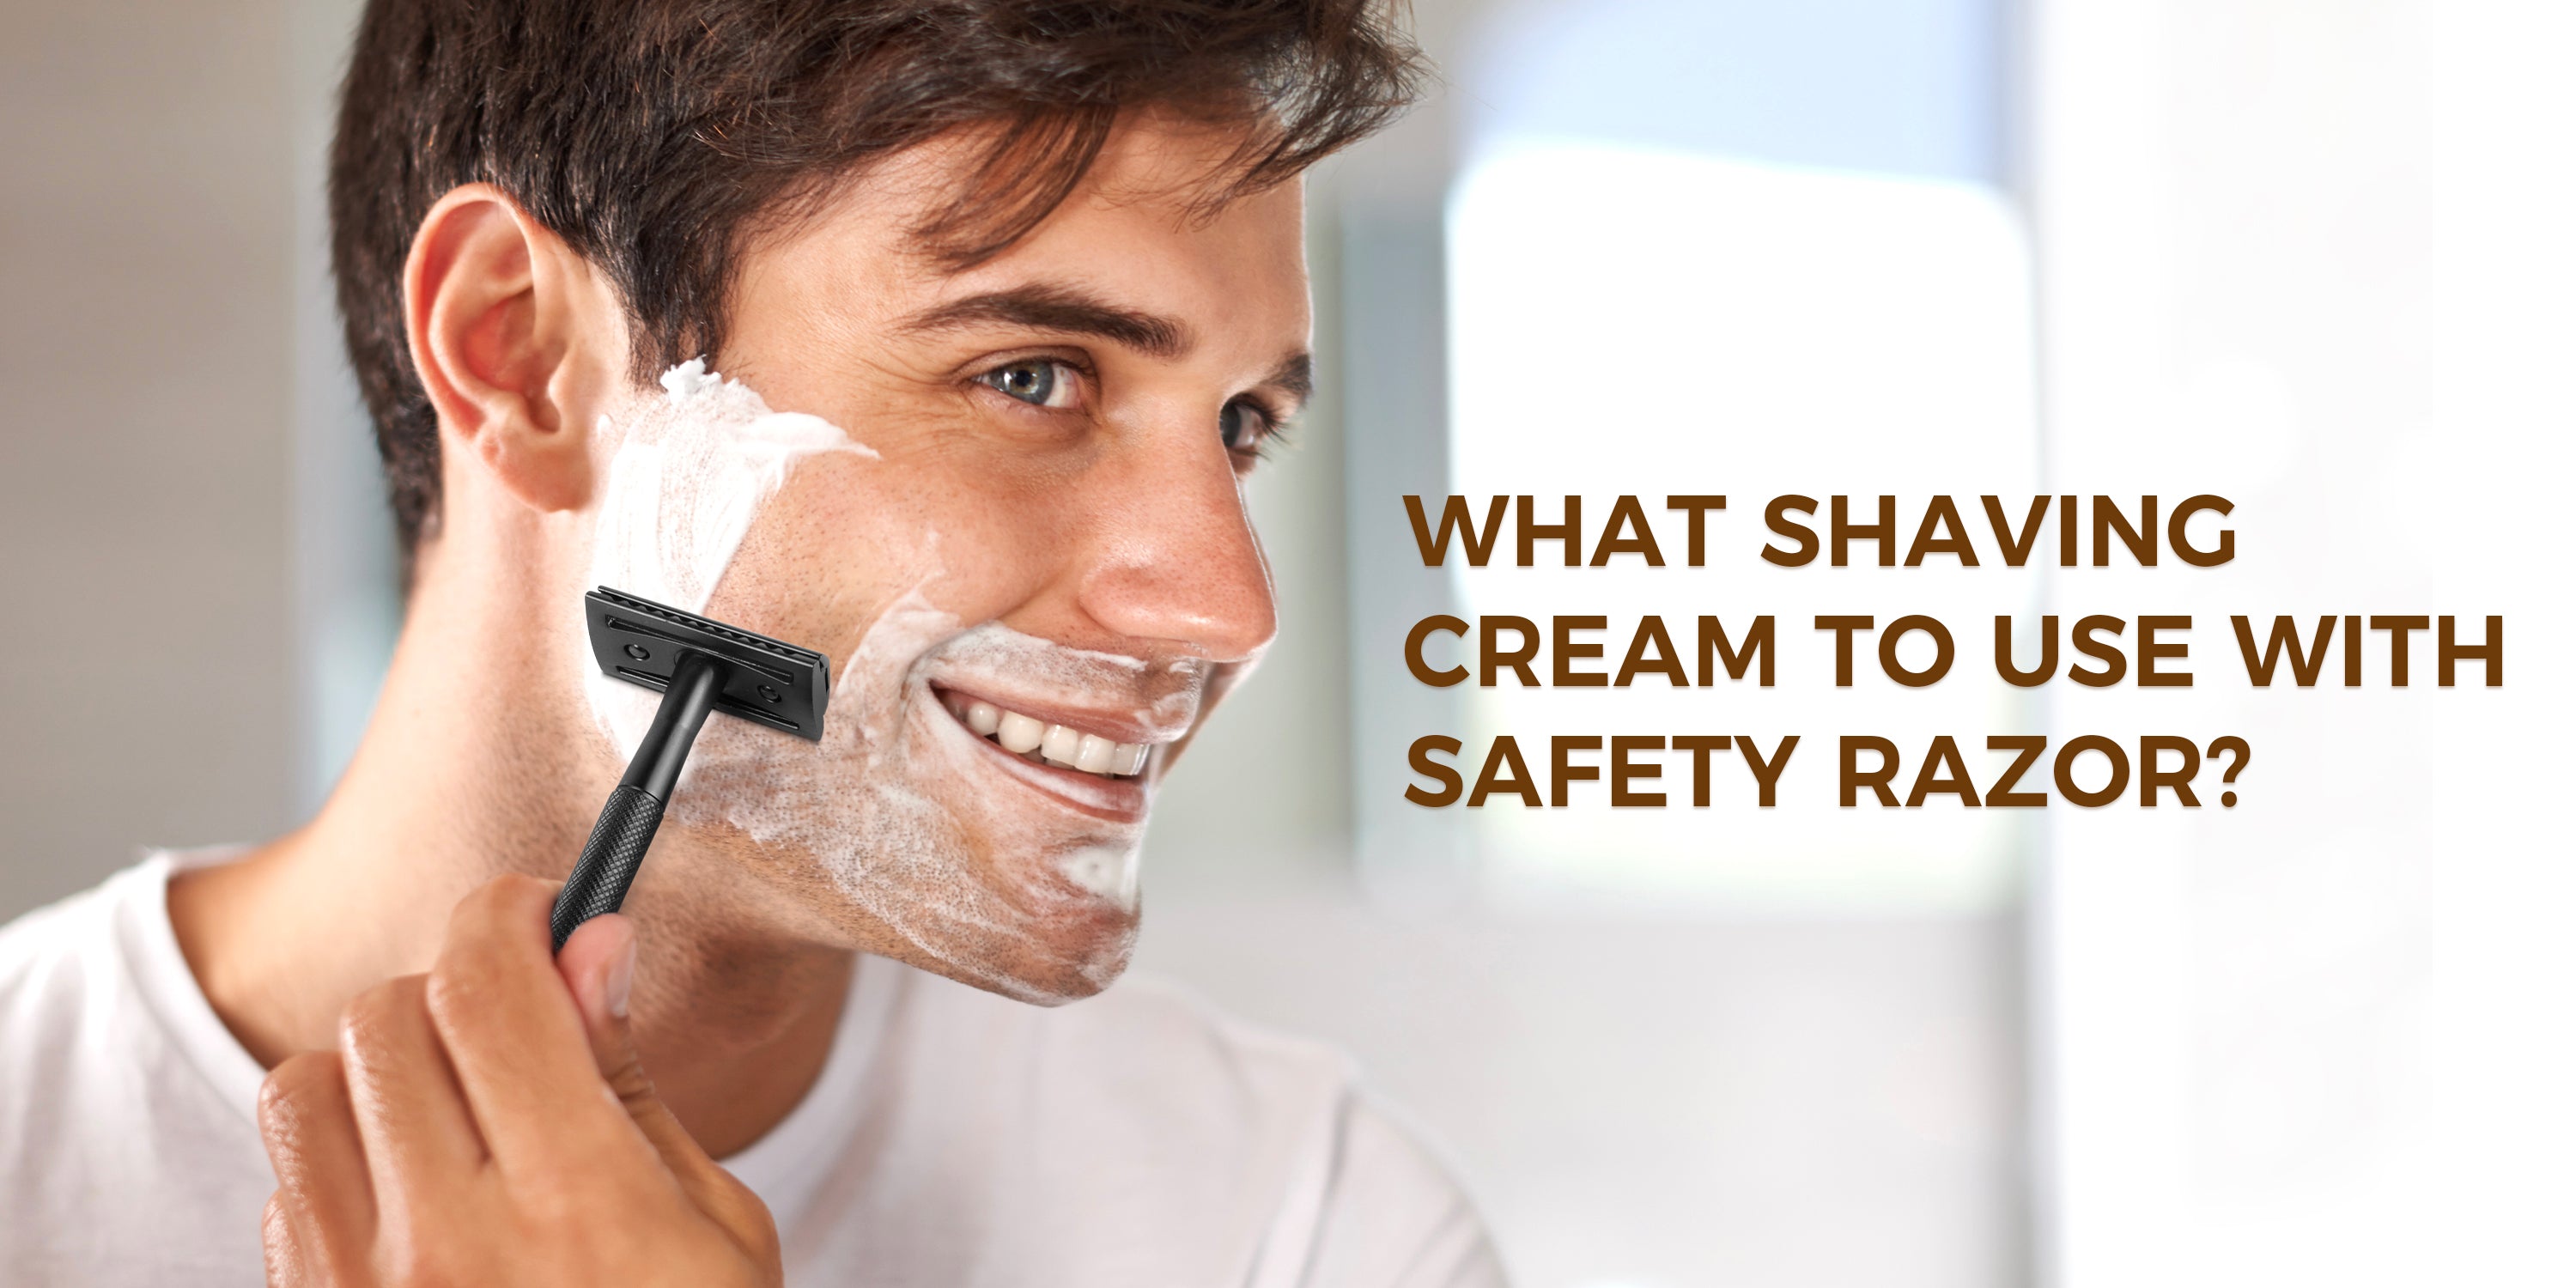 What shaving cream to use with safety razor?